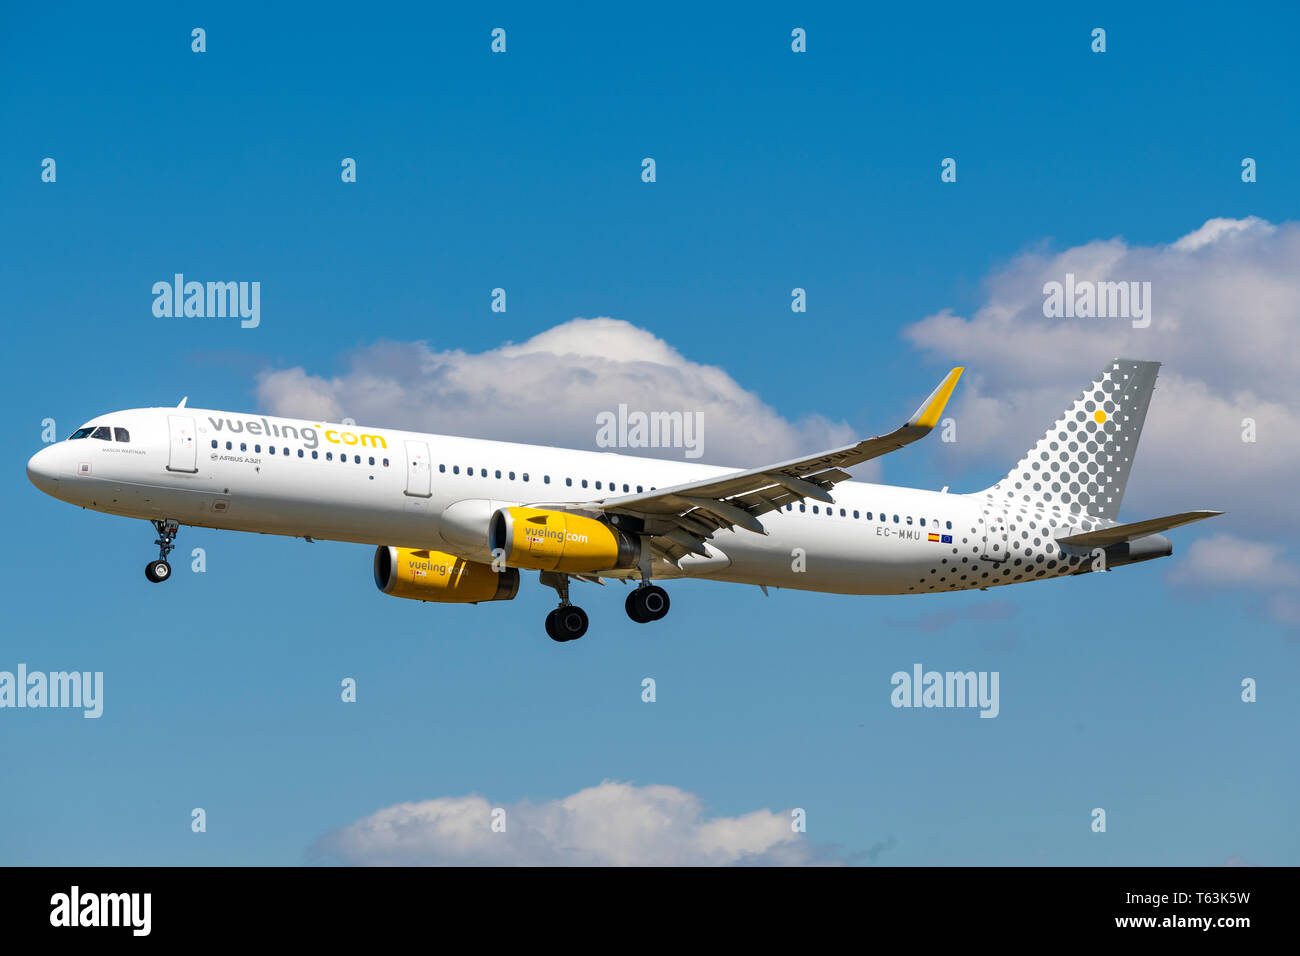 Vueling Airbus A321 with winglets on approach, Barcelona El Prat airport, Catalonia, Spain Stock Photo